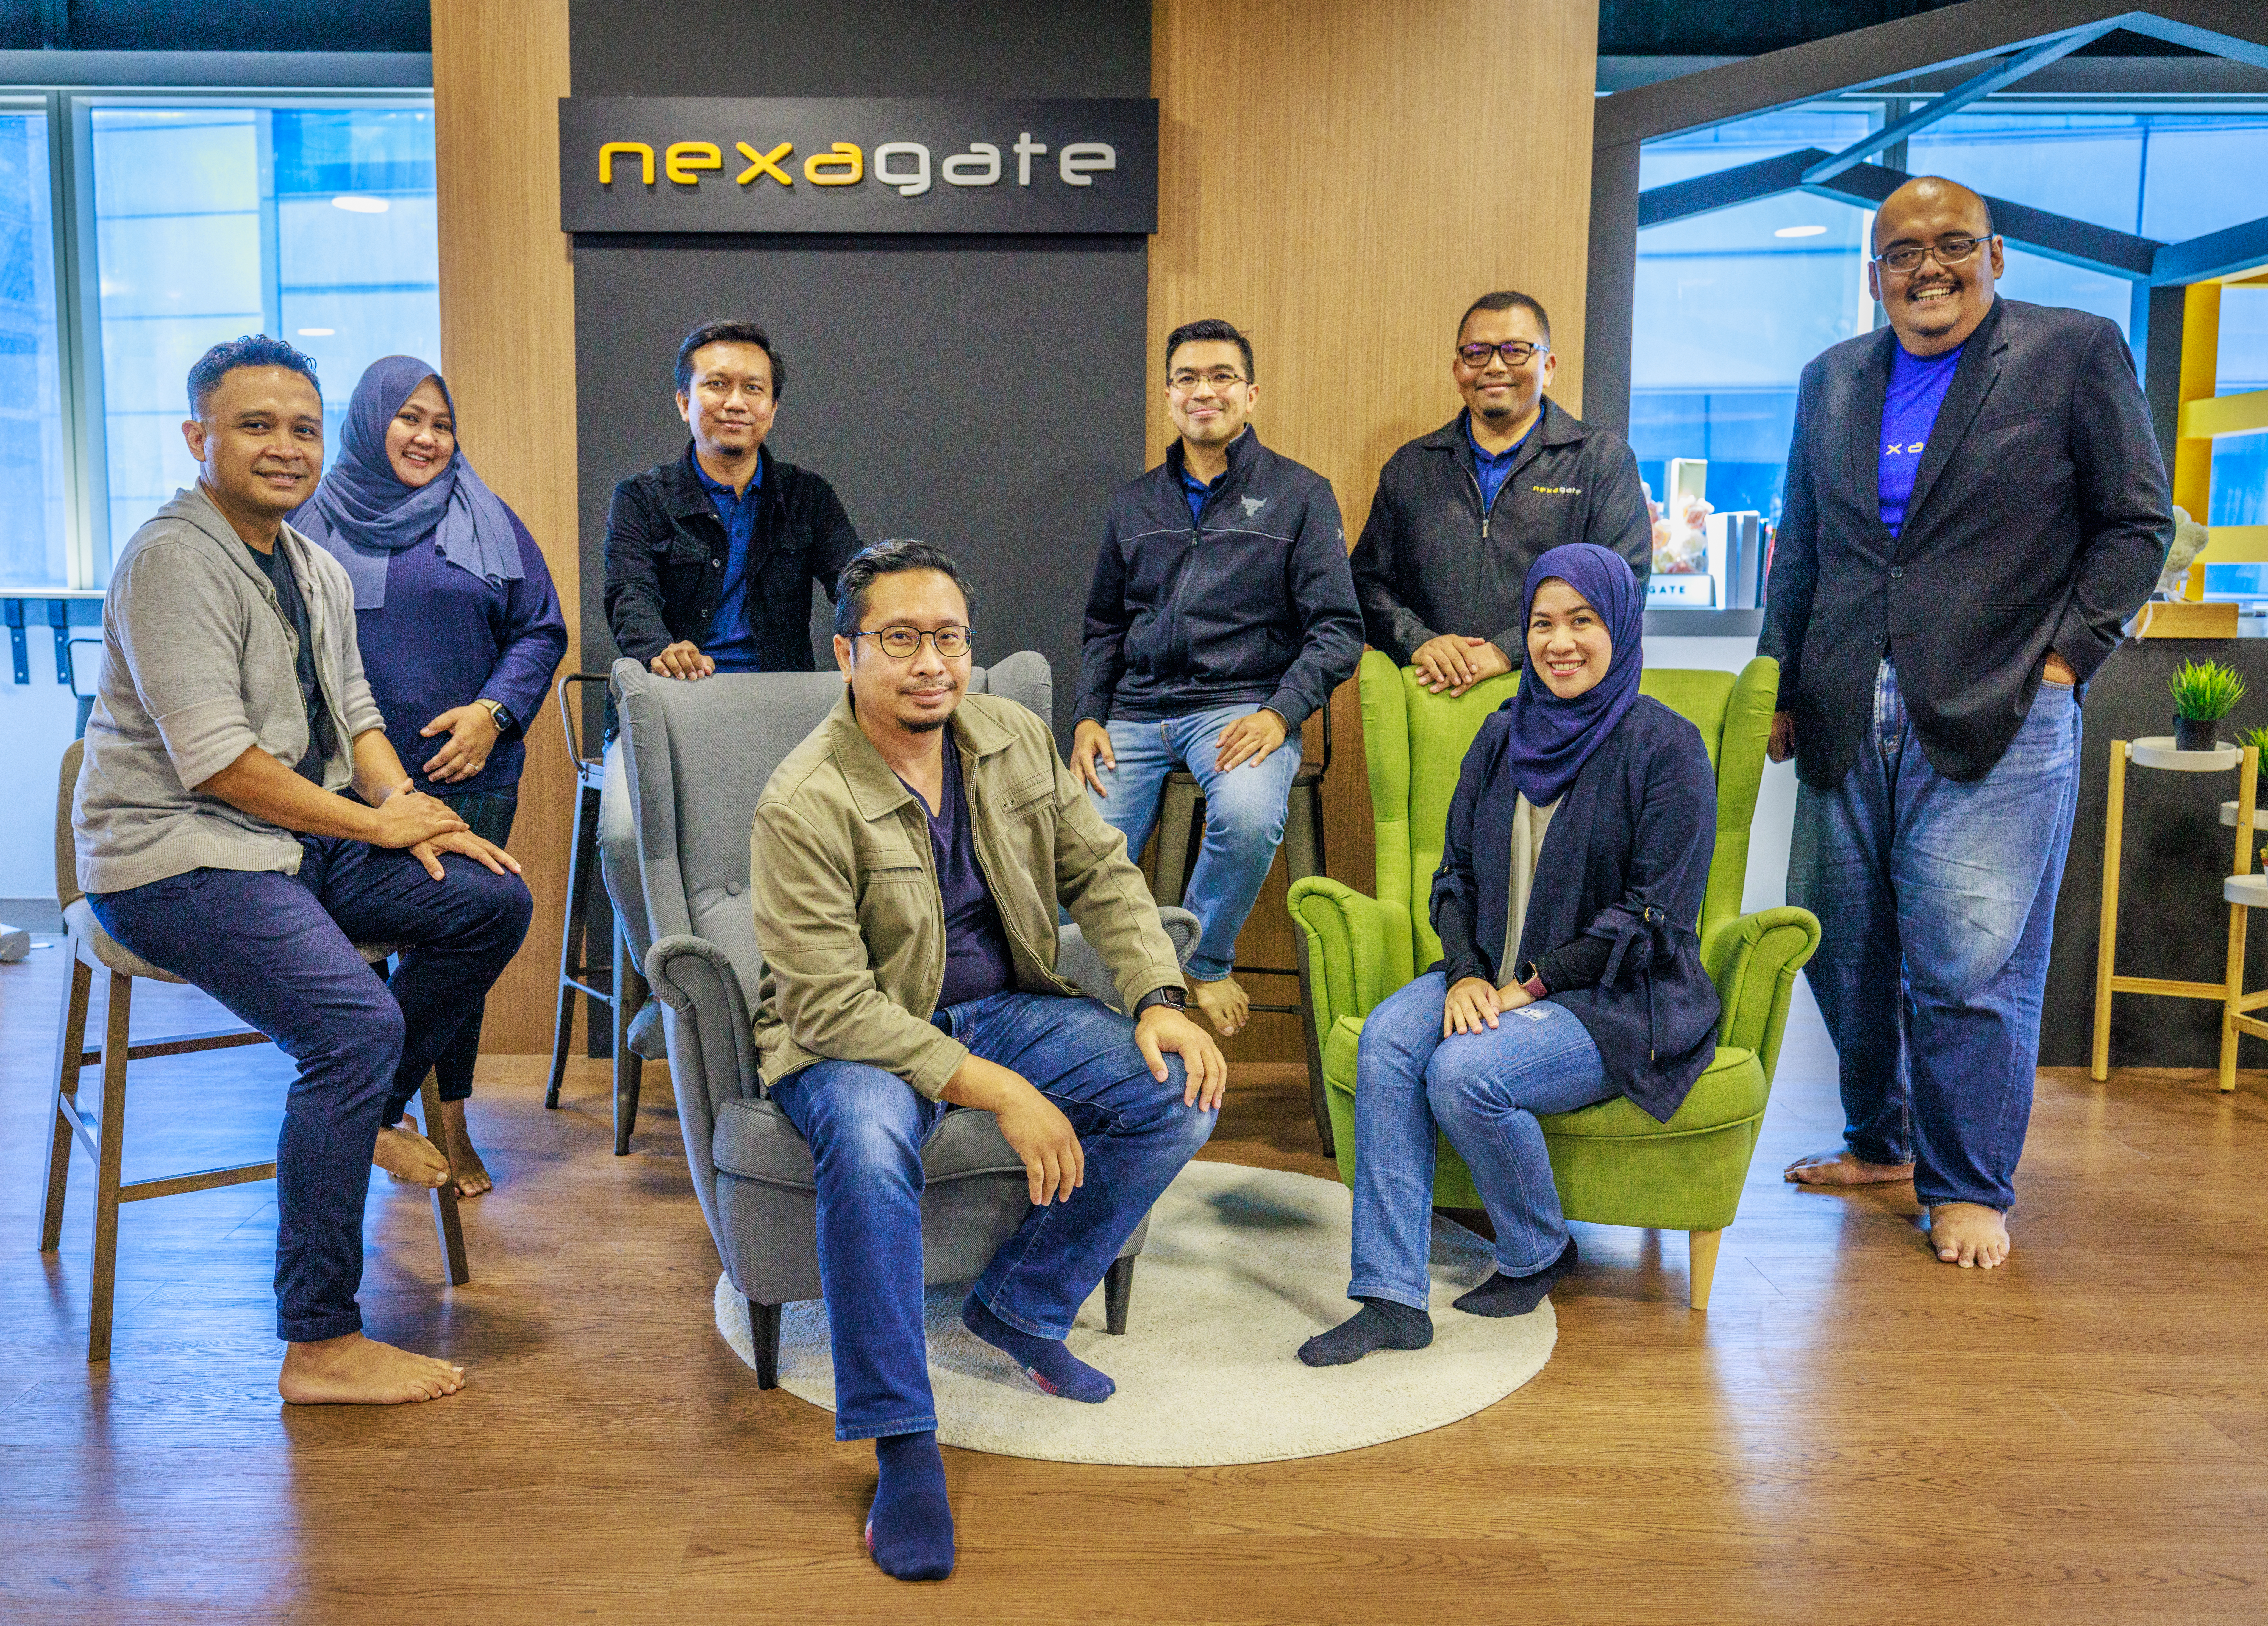 Khairil Effendy (standing 3rd from right) with senior executives from Nexagate.